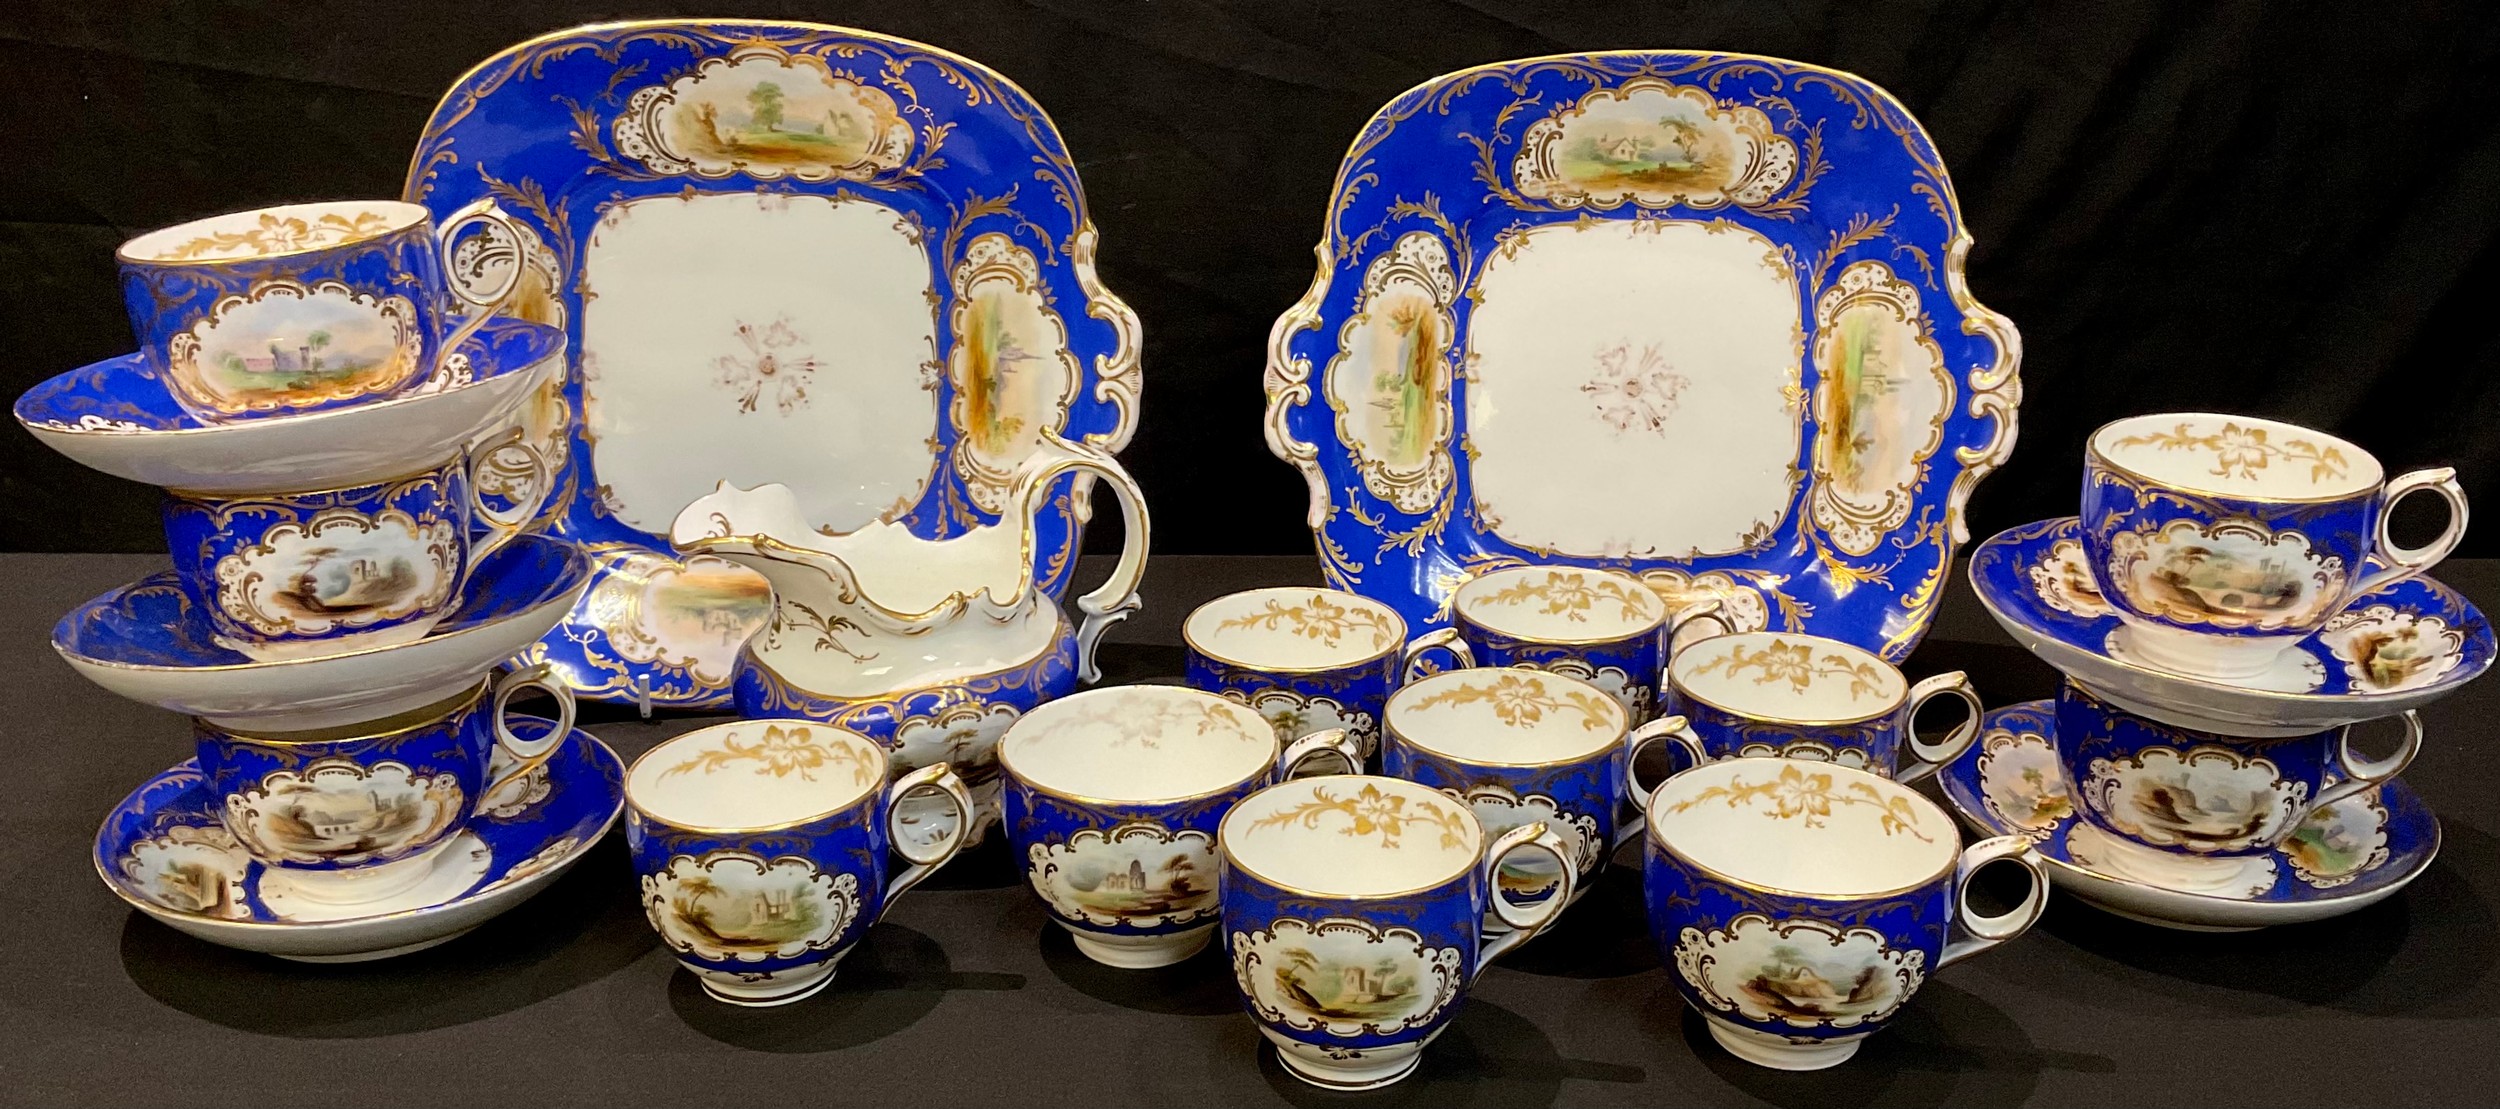 A 19th century Staffordshire part tea service, gilt edged panels painted with picturesque views on